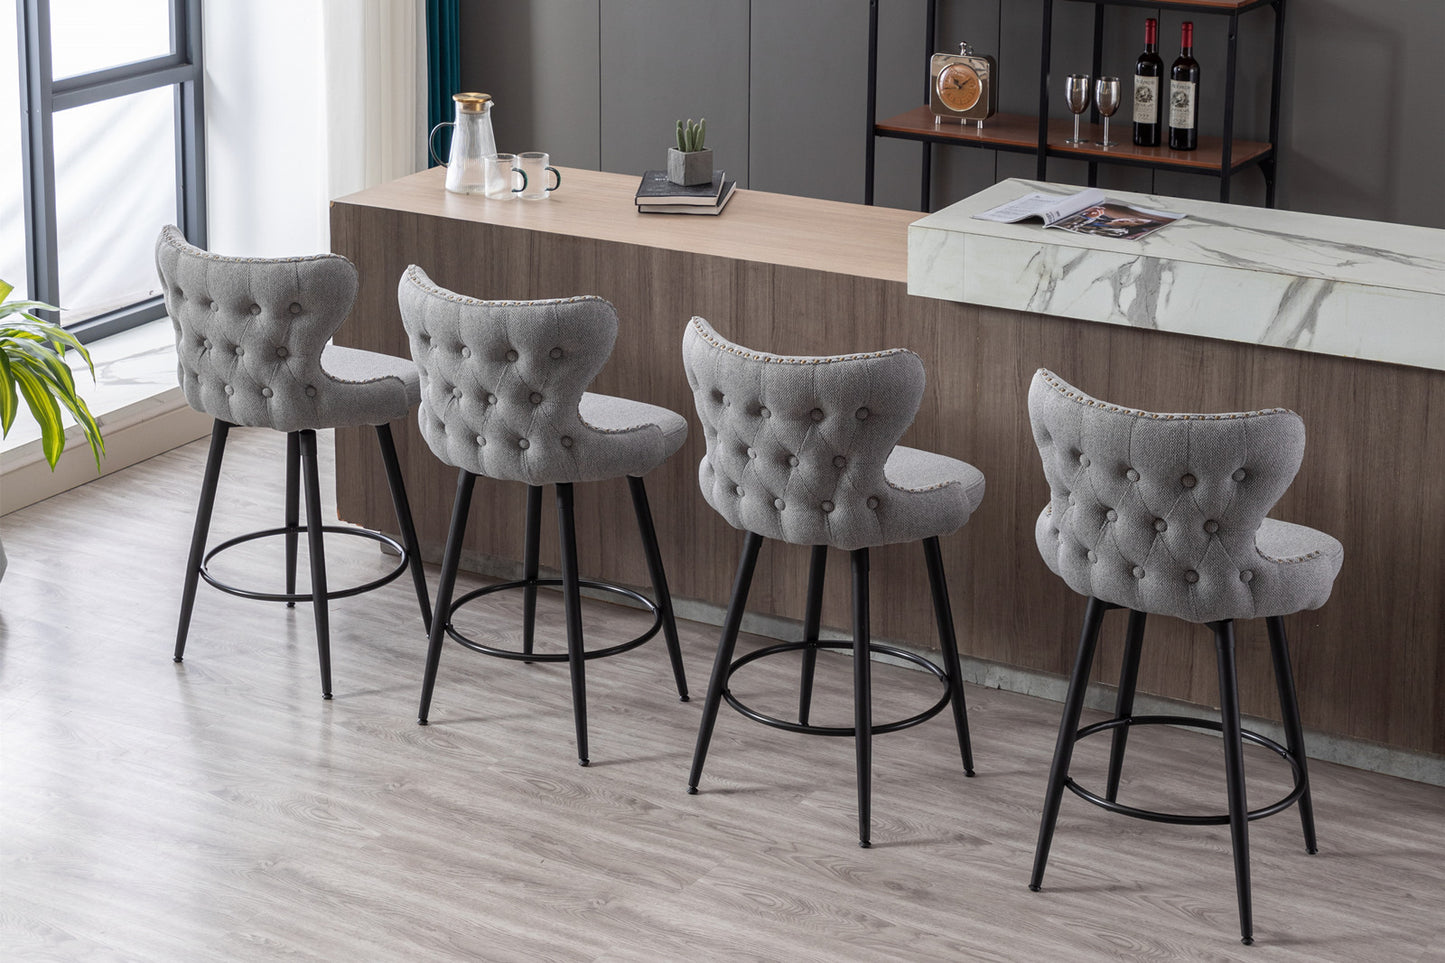 Counter Height 25" Modern Linen Fabric Counter Chairs, 180 degree Swivel Bar Stool Chair for Kitchen, Tufted Cupreous Nailhead Trim Burlap Bar Stools with Metal Legs, Set of 2 (Gray)